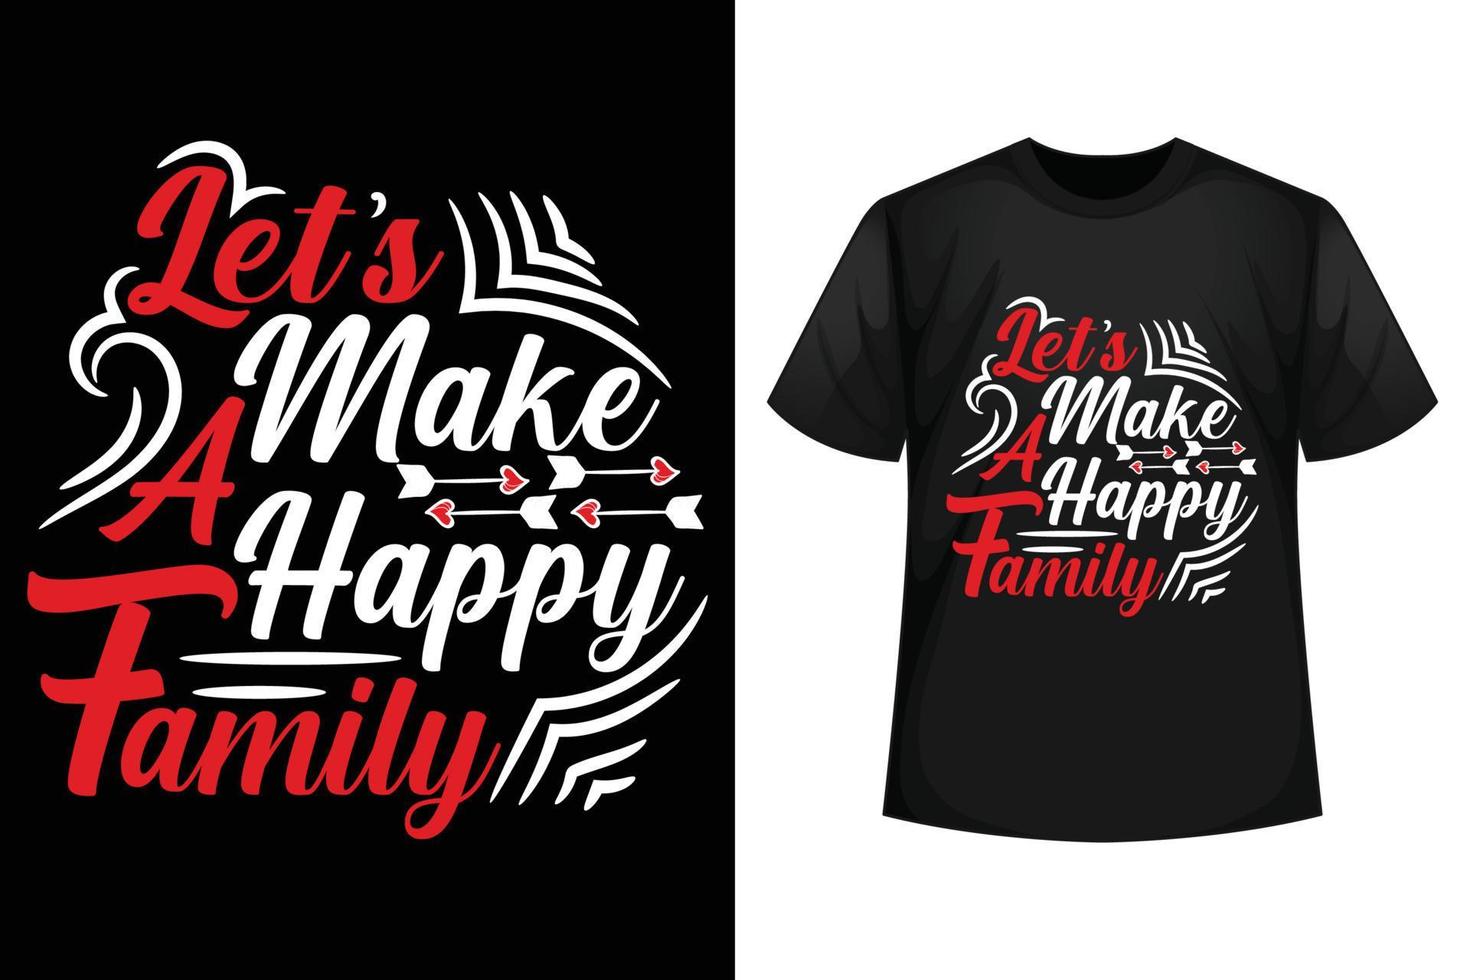 let's make a happy family - Family t-shirt design template. vector